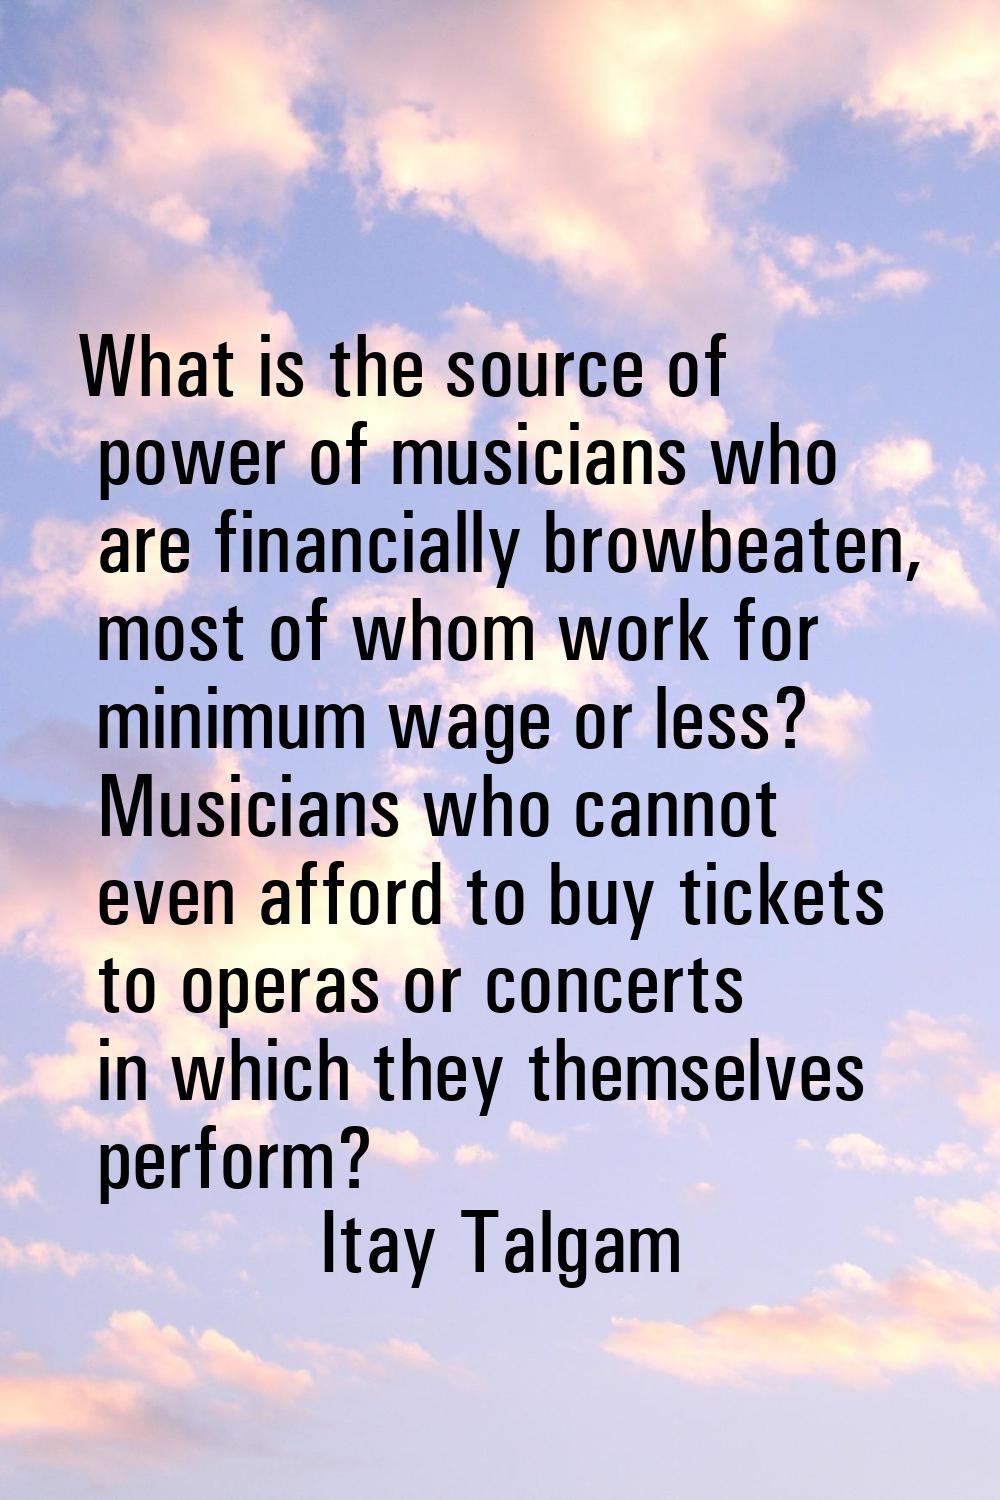 What is the source of power of musicians who are financially browbeaten, most of whom work for mini